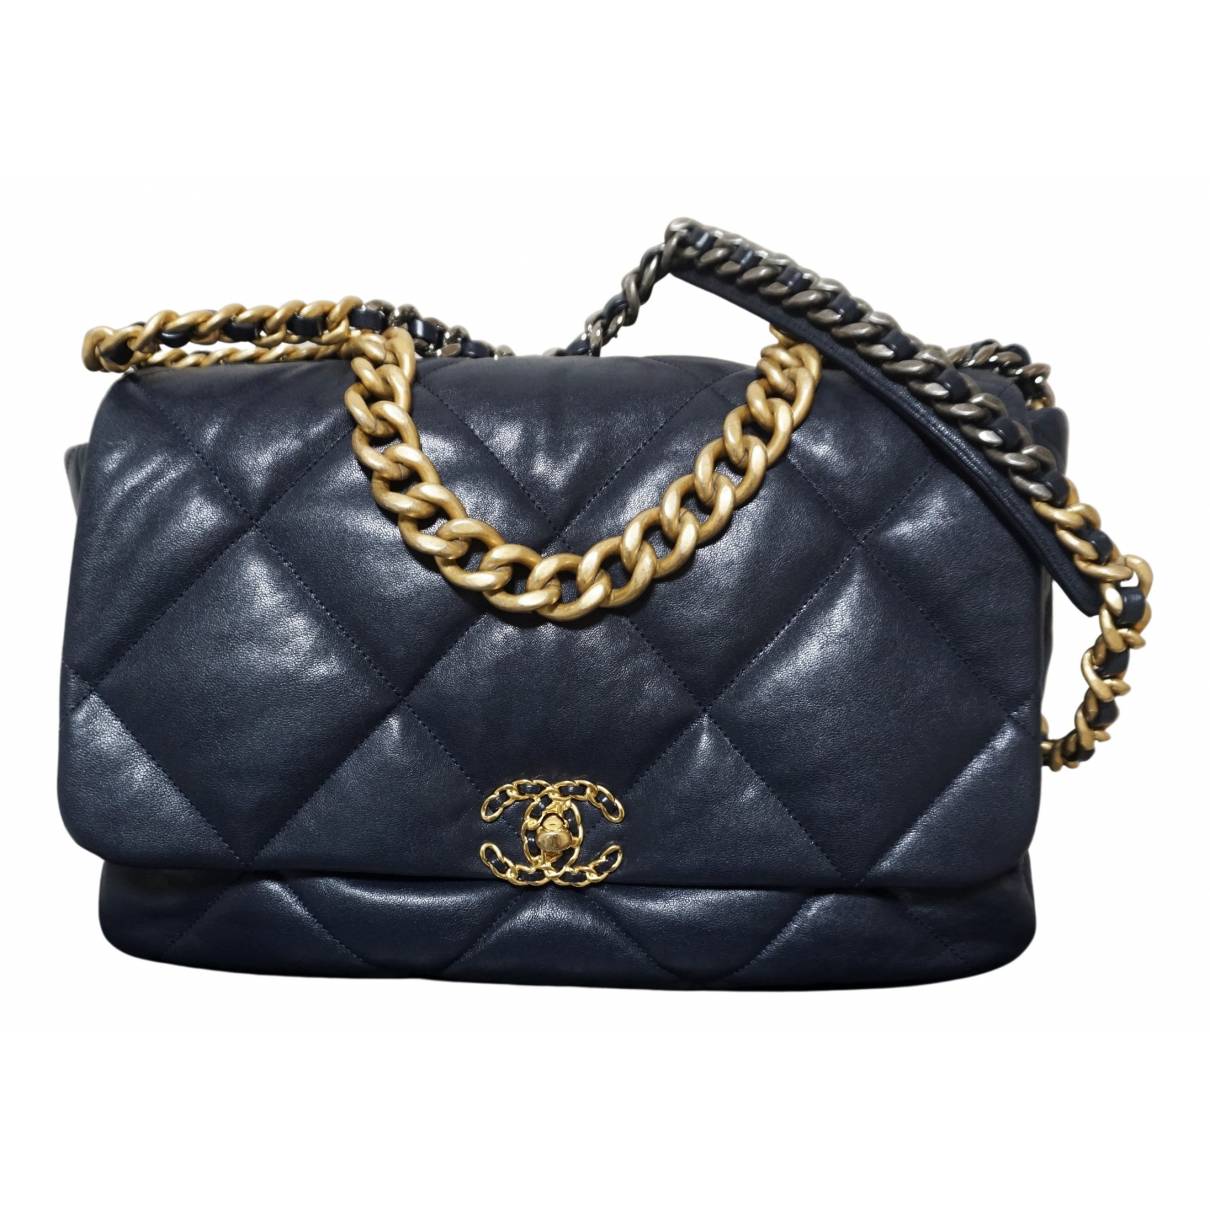 Chanel - Authenticated Chanel 19 Handbag - Leather Navy Plain for Women, Never Worn